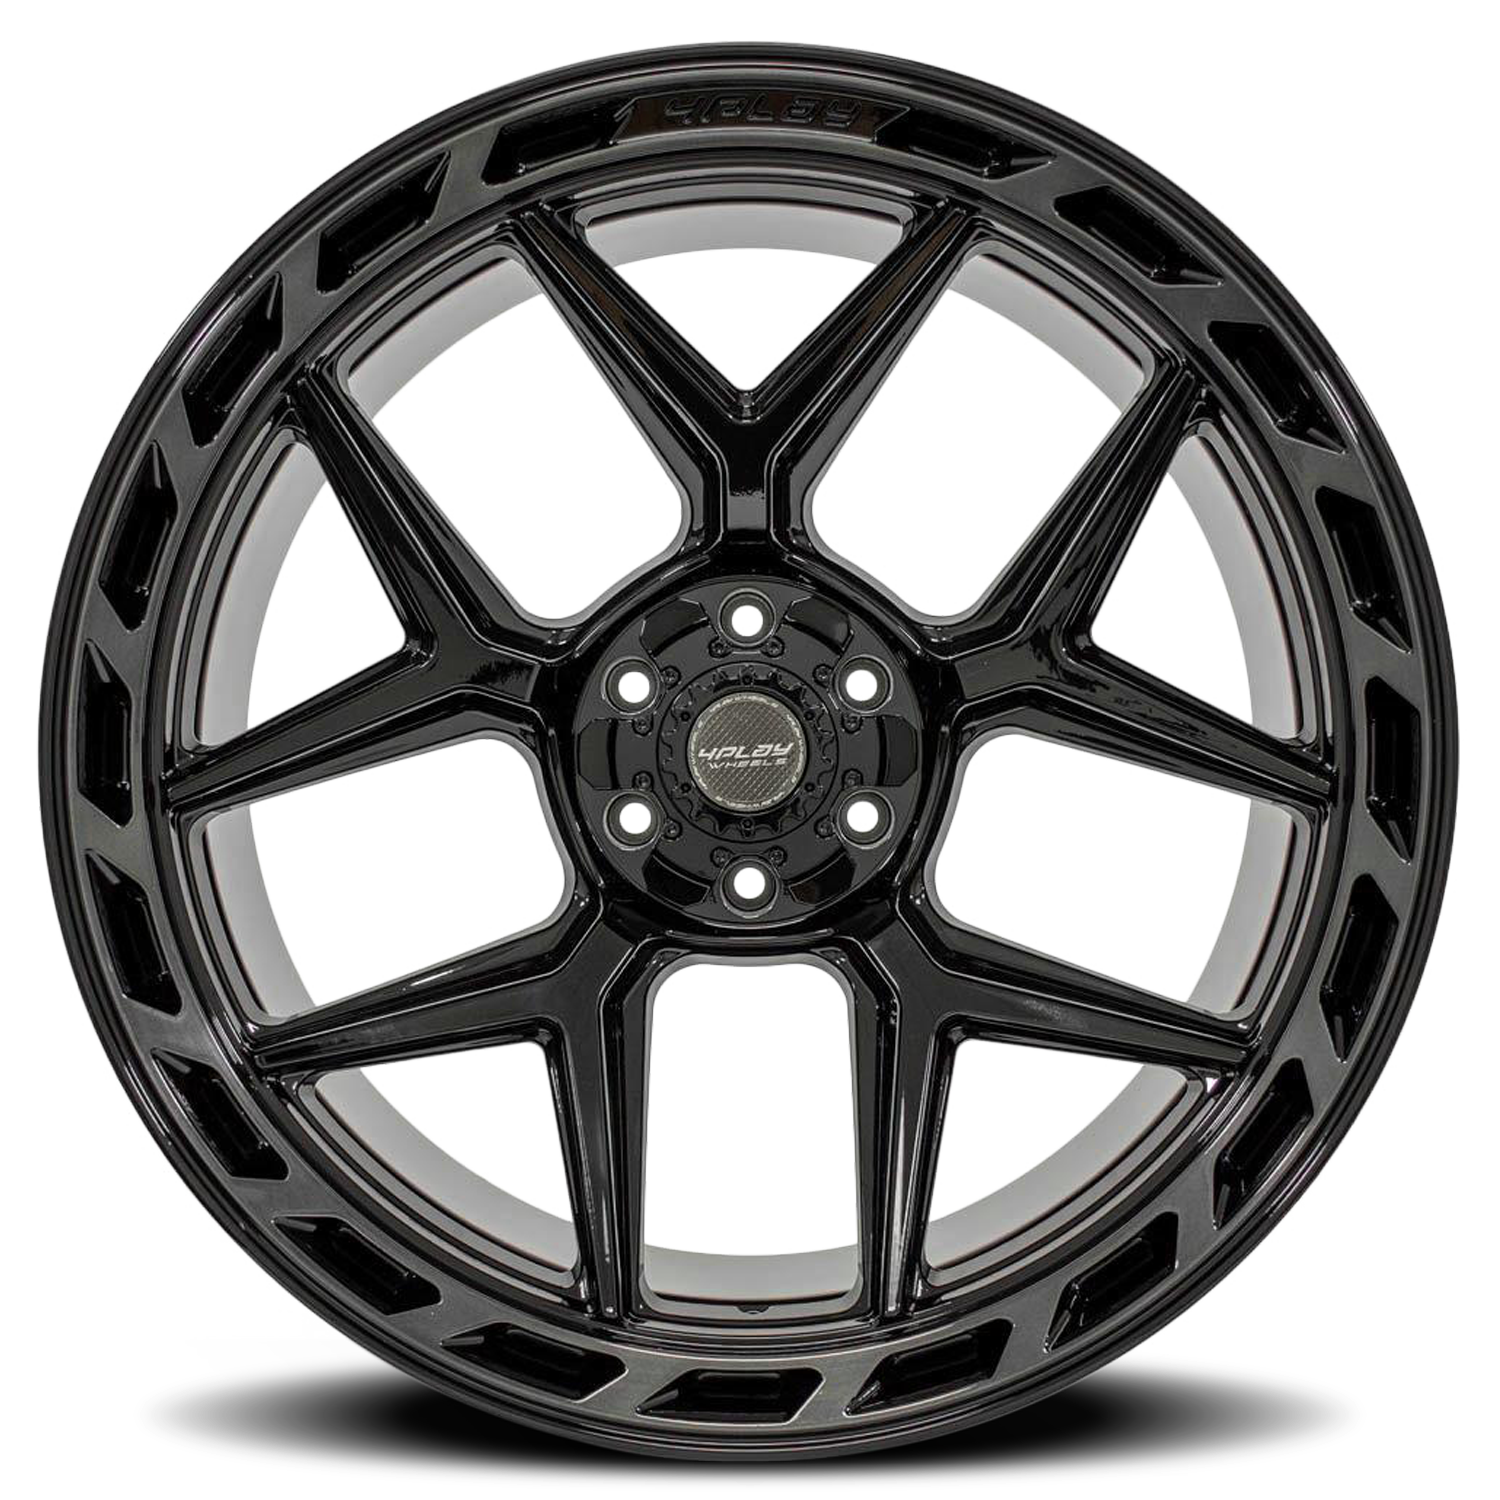 https://storage.googleapis.com/autosync-wheels/4PLAY/4P55_BBT_Gloss_Black_Brushed-Face-Tinted-Clear_6-lug_0003.png